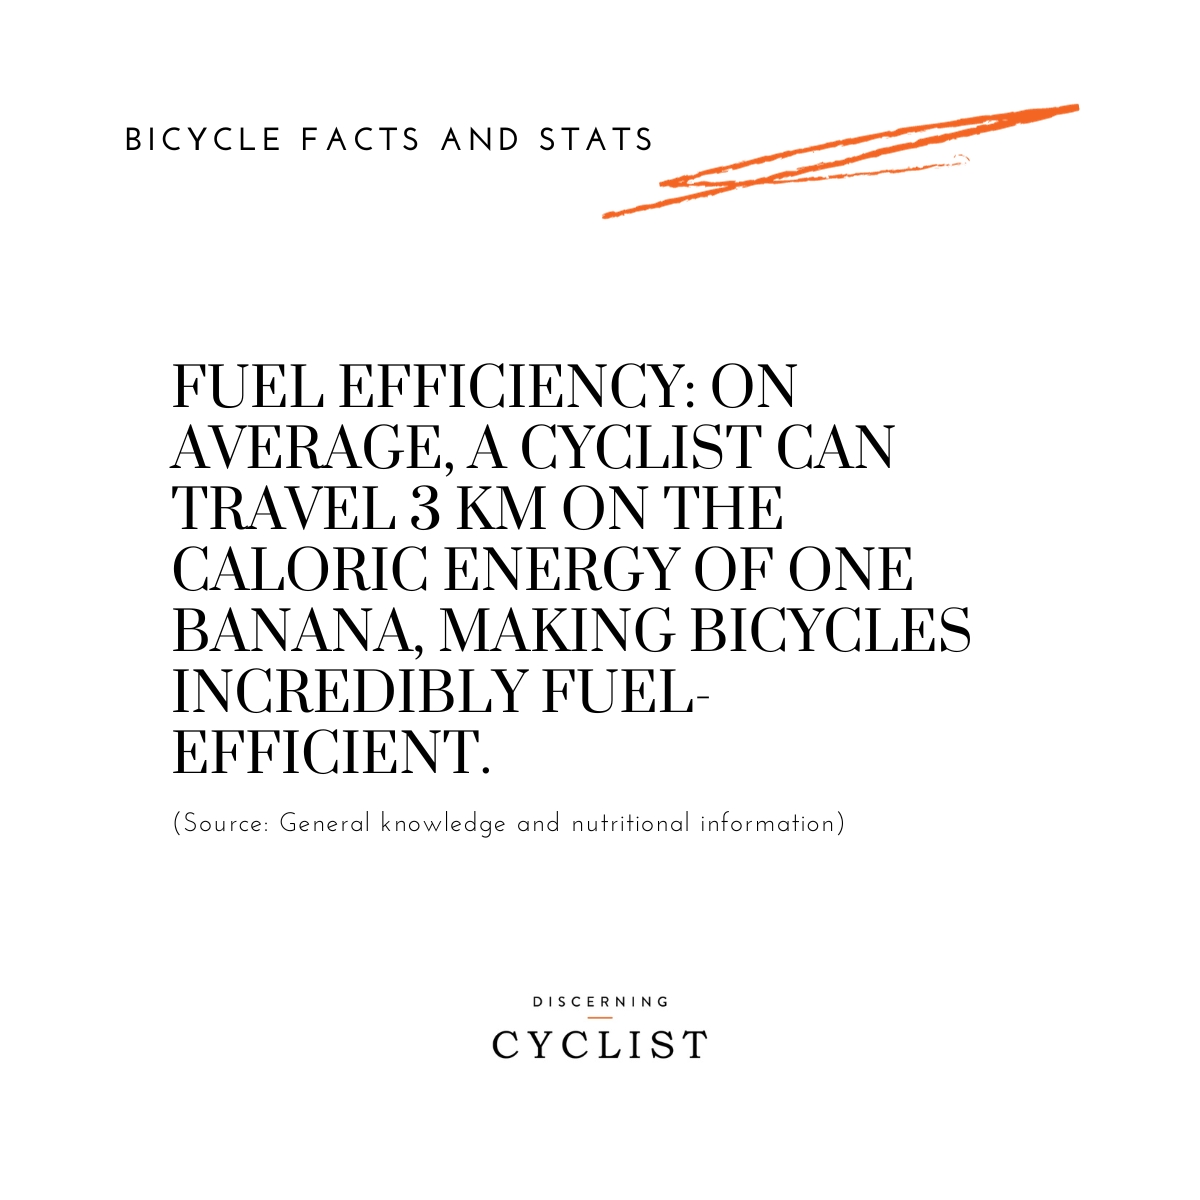 Fuel Efficiency: On average, a cyclist can travel 3 km on the caloric energy of one banana, making bicycles incredibly fuel-efficient.